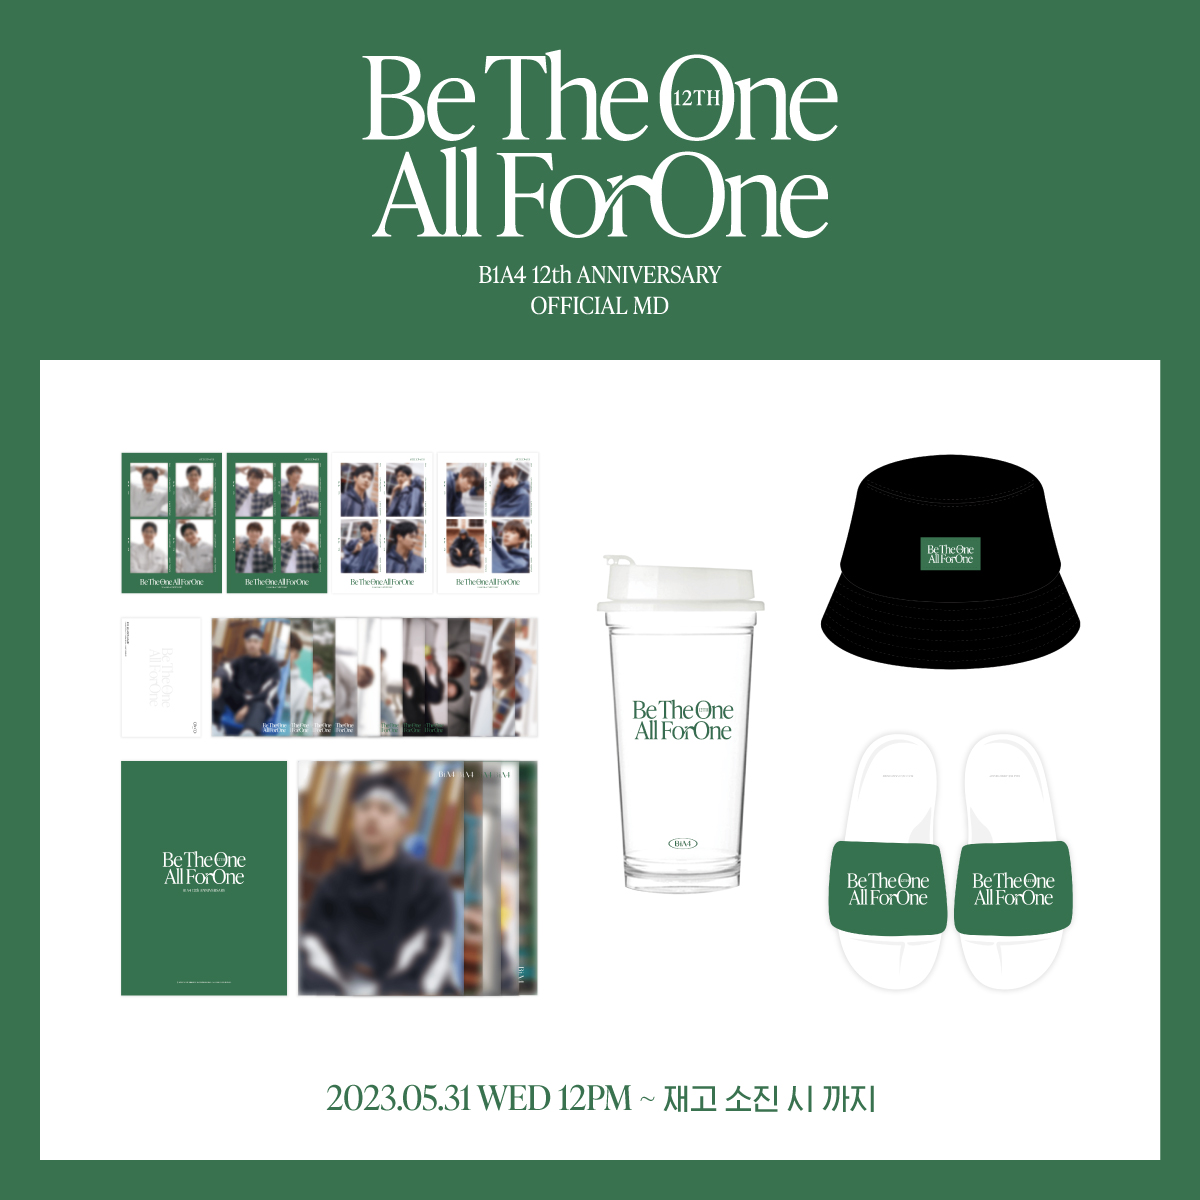 B1A4 12th ANNIVERSARY [Be The One All For One] OFFICIAL MD OPEN

📅 ONLINE PRE-ORDER : 2023. 05. 31 (WED) 12:00 PM (KST) ~ 재고 소진 시
🔗PLACE OF SALE : wmstore.co.kr

#B1A4 #BeTheOne_AllForOne #WMstore